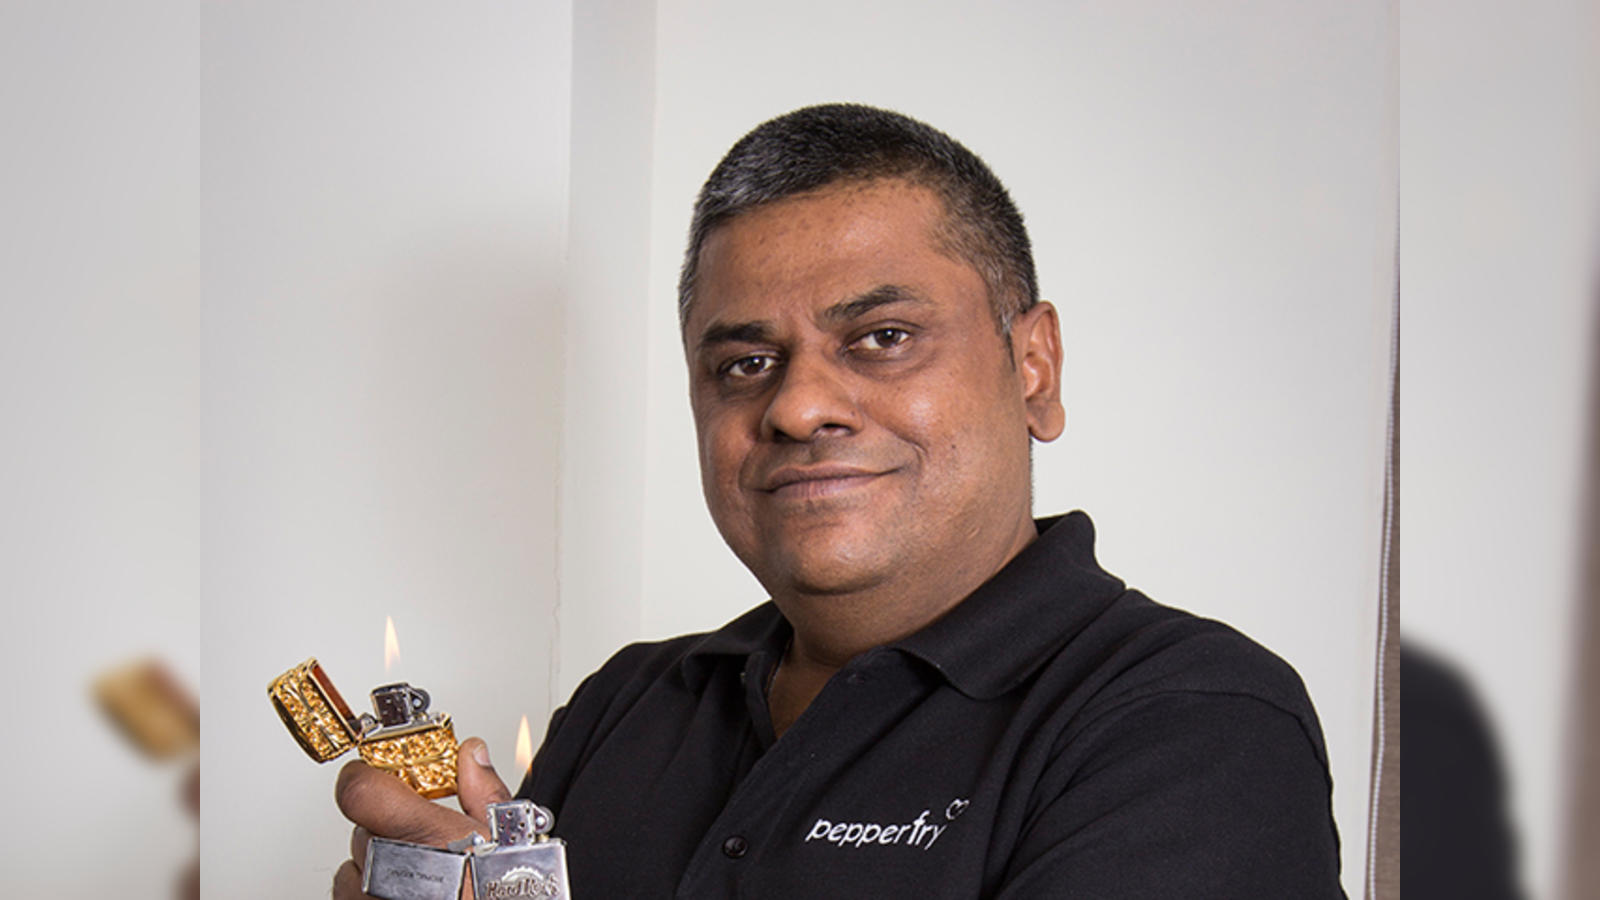 fact is often more surreal than fiction says pepperfry boss ambareesh murty